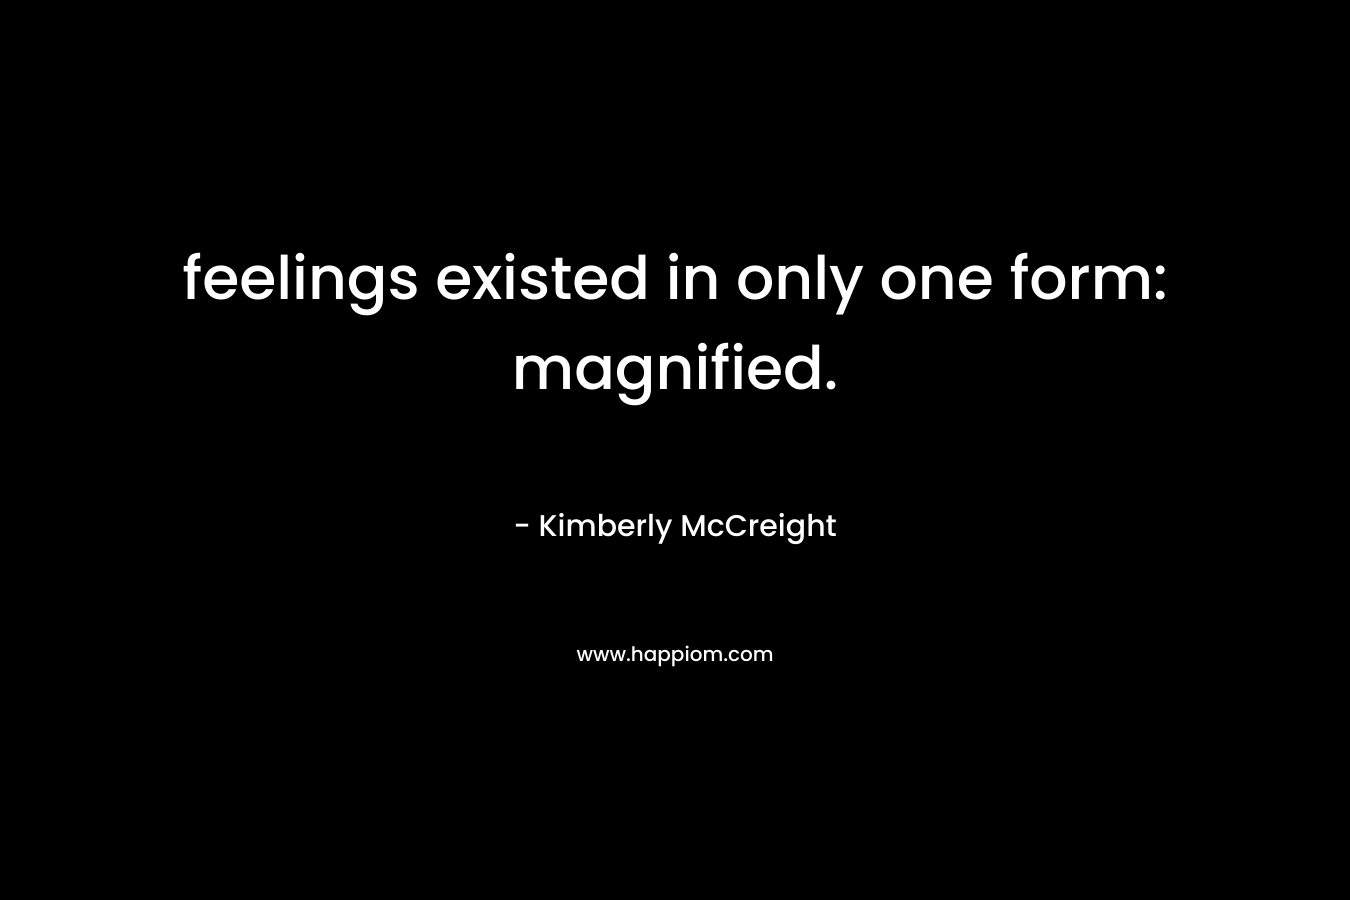 feelings existed in only one form: magnified.